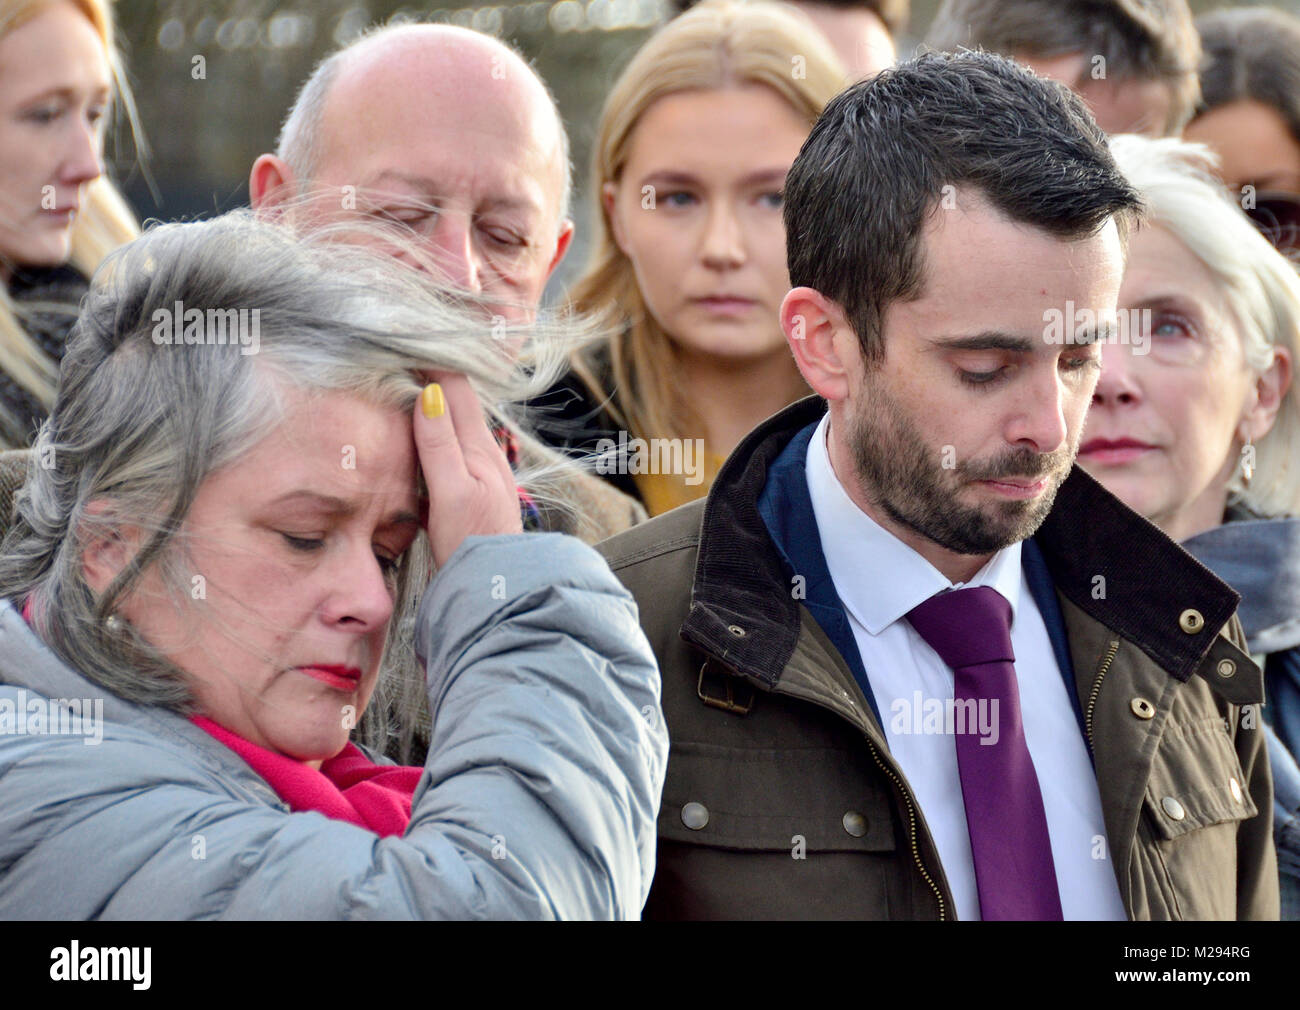 Maidstone, UK. 6th Feb. The family of 23 year old Molly McLaren leave Maidstone Crown Court and make a statement after seeing her ex-boyfriend Joshua Stimson (26) sentenced to life in prison with a minimum of 26 years for her murder in Chatham in June 2017. Her mother, Joanne McLaren, and Sergeant Ali Walton reading out the statement. Credit: PjrFoto/Alamy Live News Stock Photo